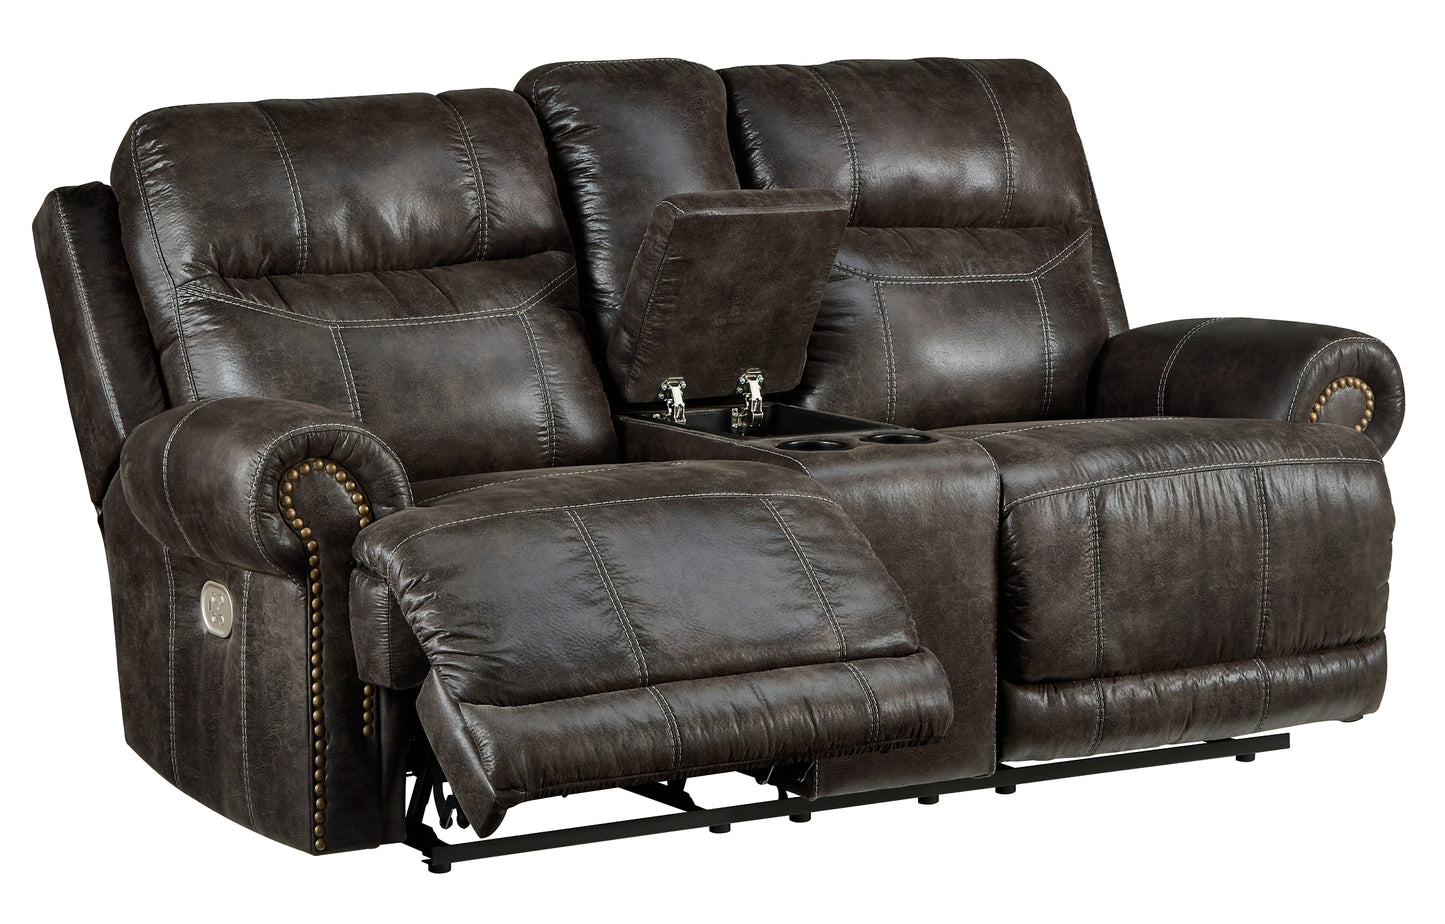 Grearview Sofa and Loveseat